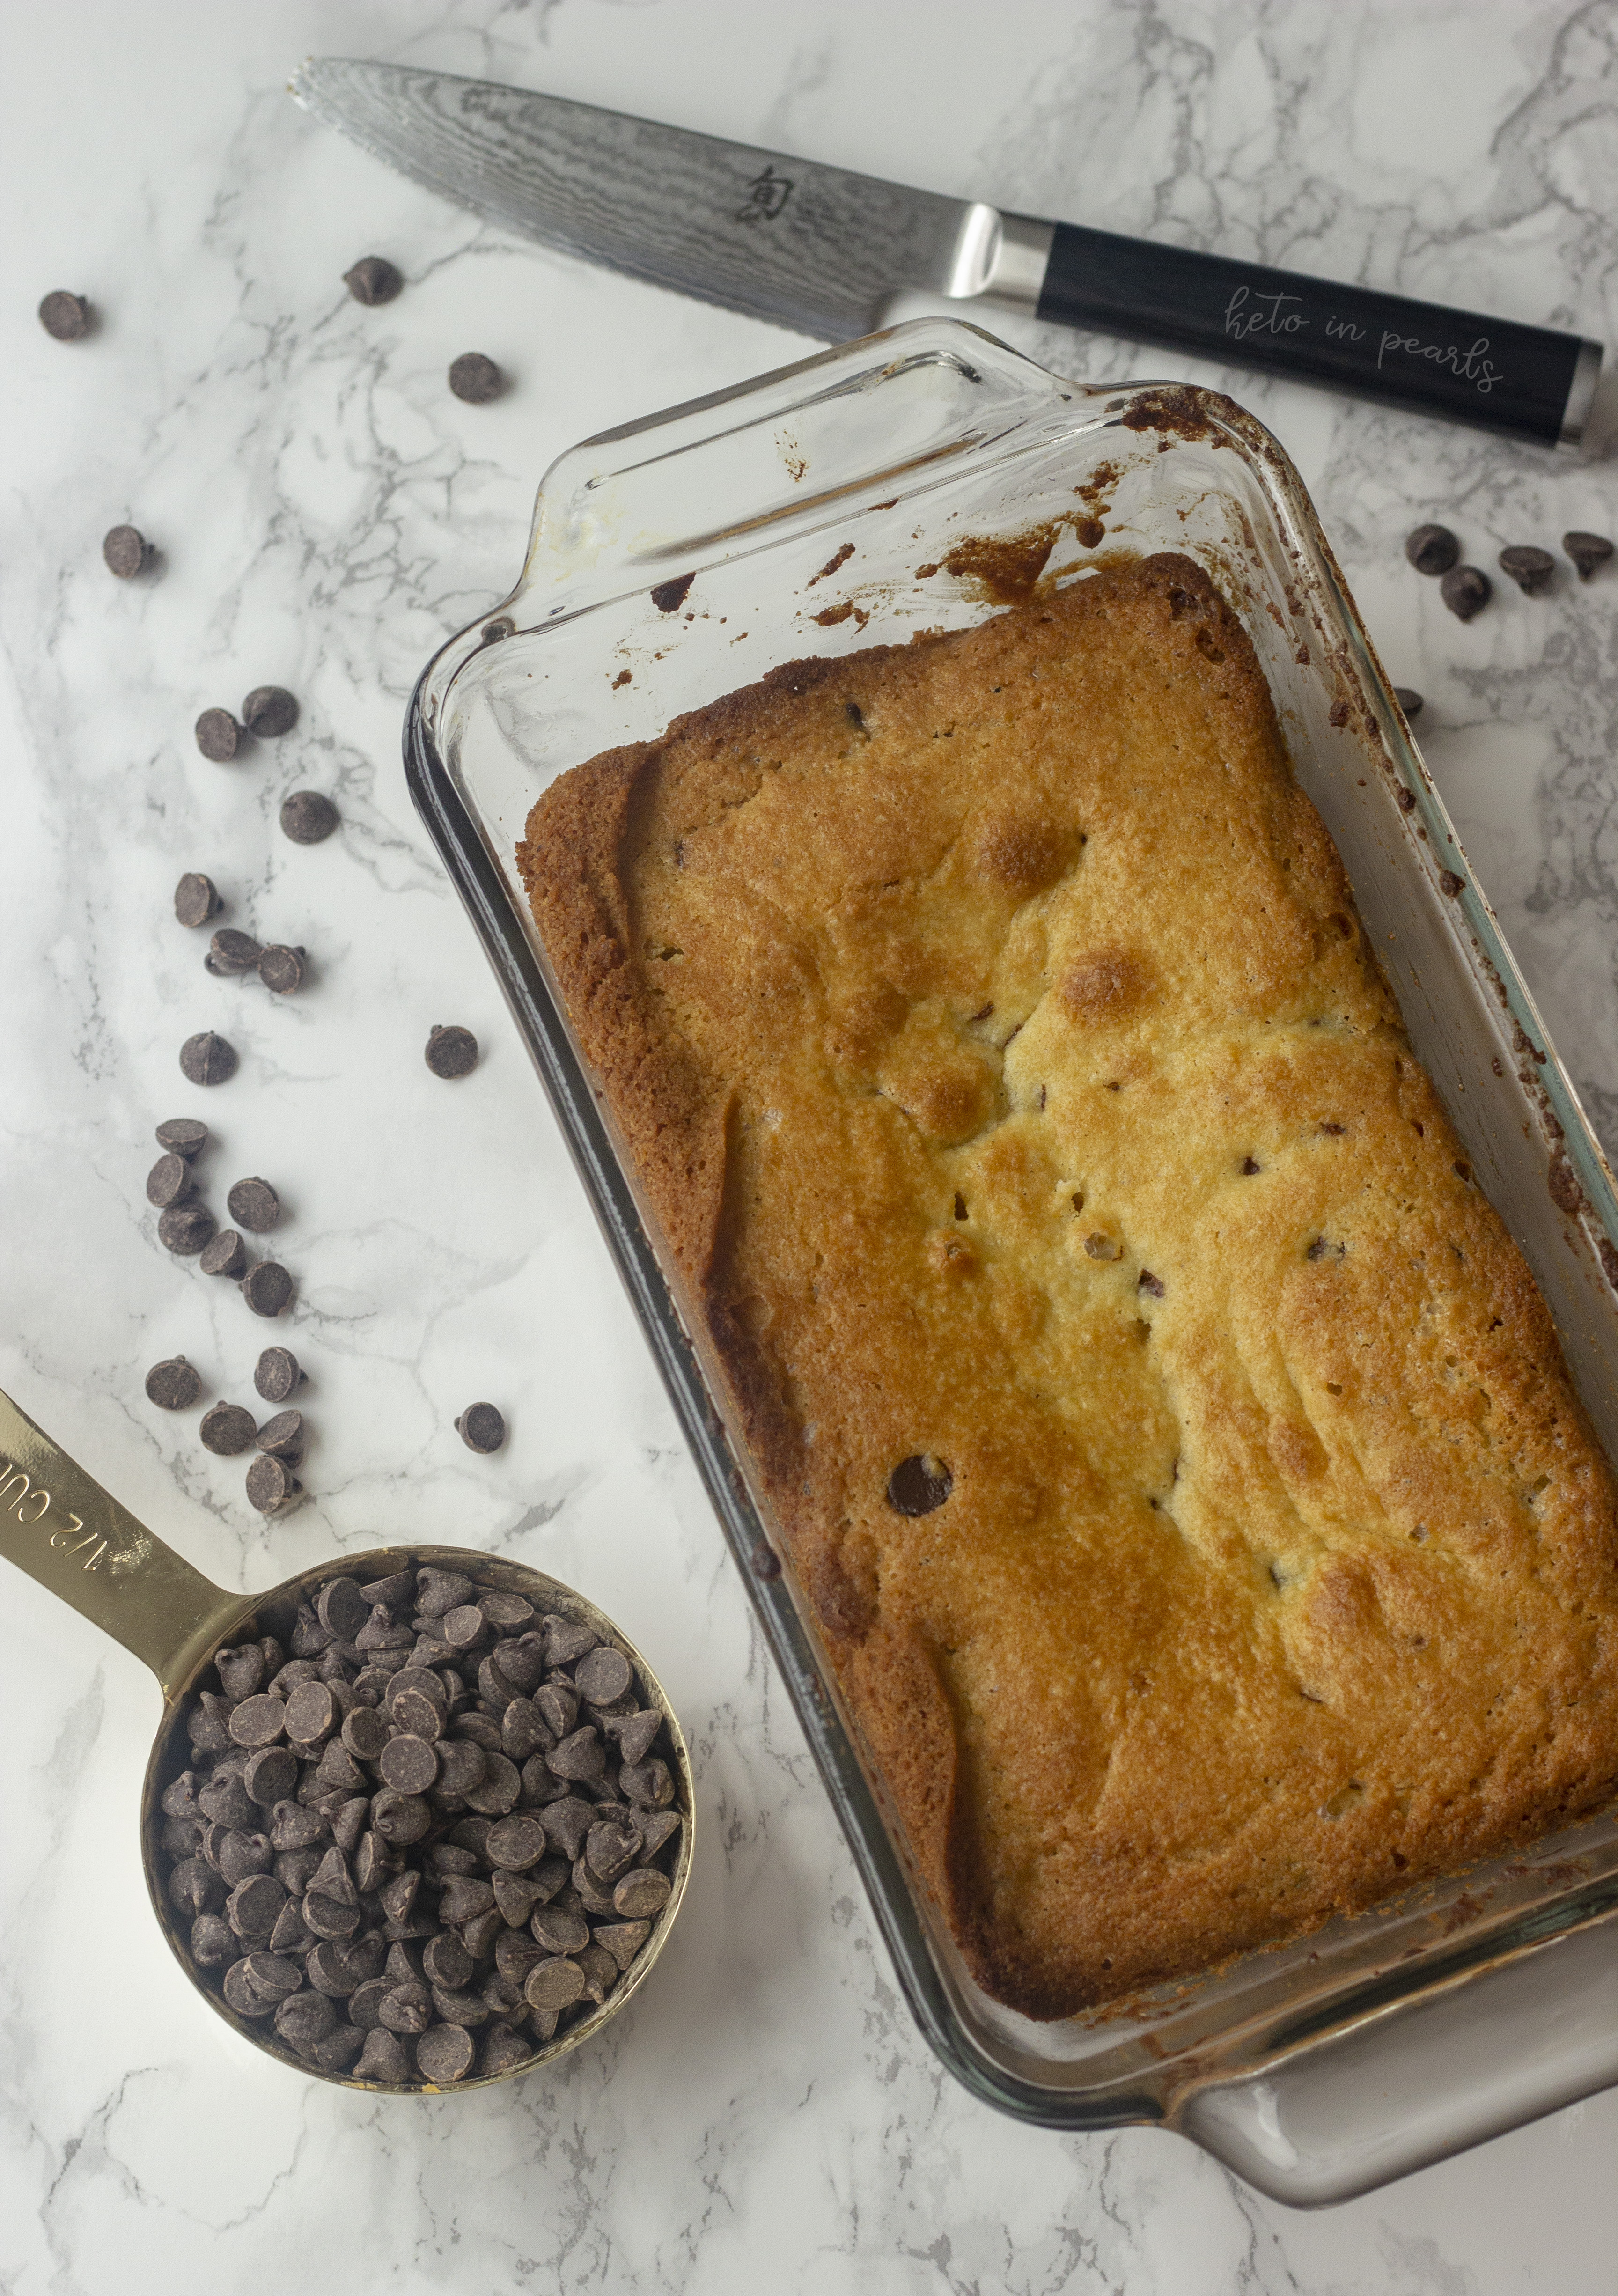 Keto banana bread with chocolate chips! Buttery, soft, and scrumptious. Only 4 net carbs for one big slice!